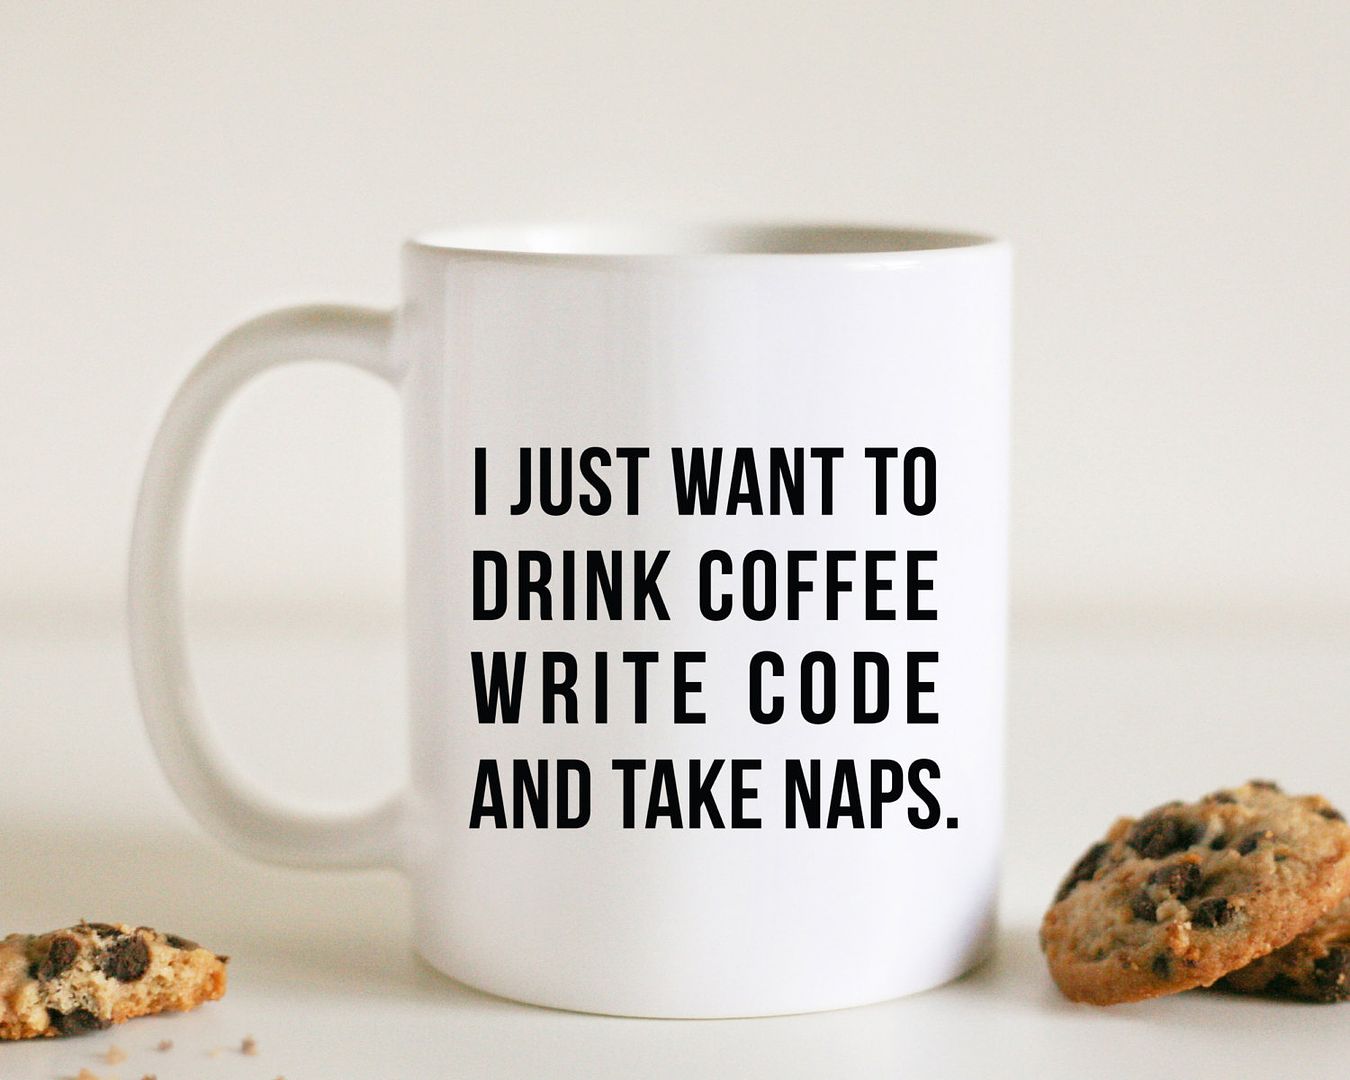 Nerdy mugs: How developers would love to spend their days and nights